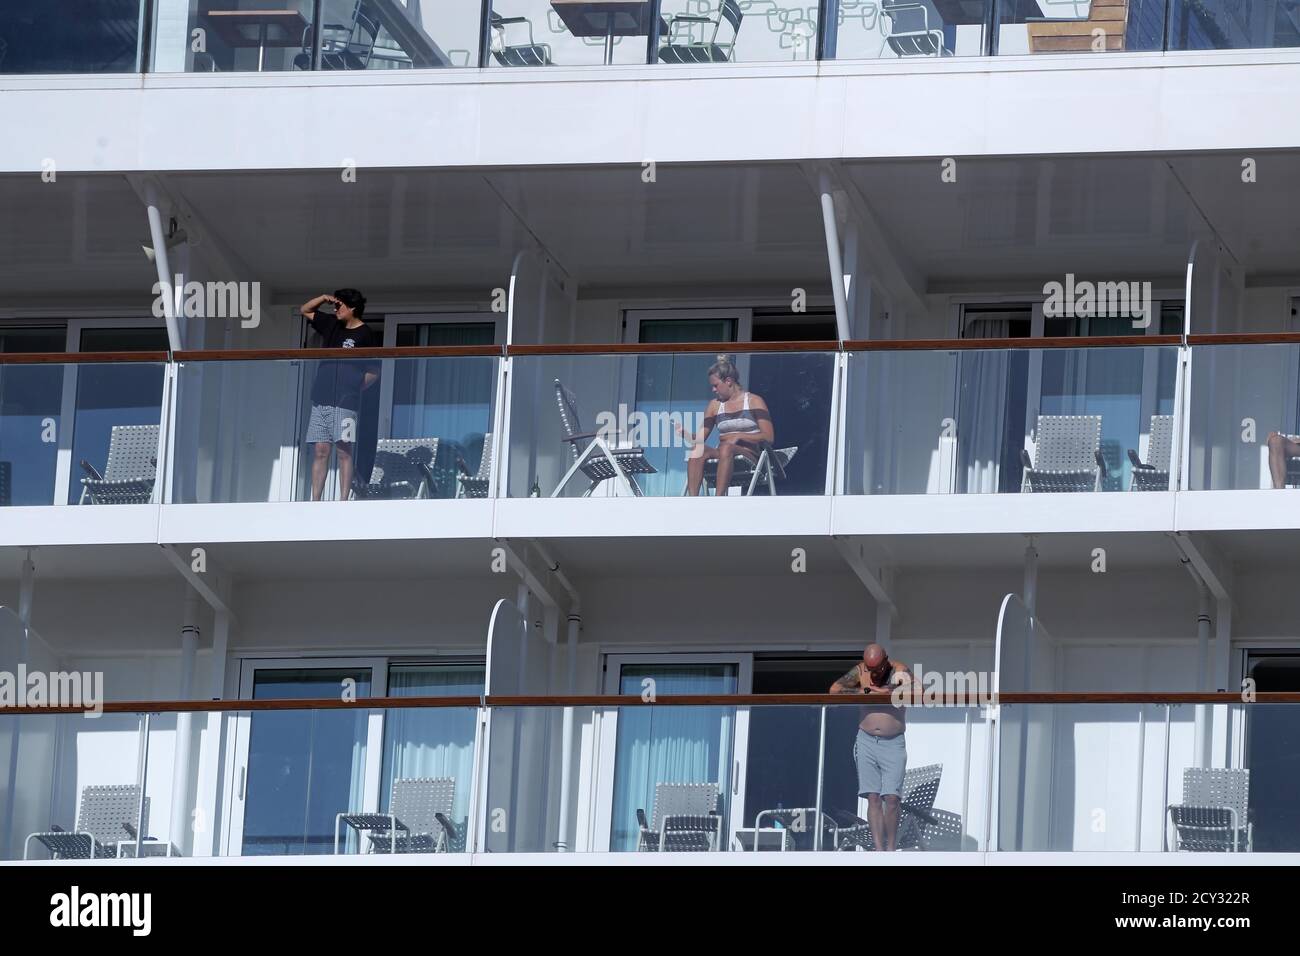 Passengers of the Mein Schiff 6 cruise ship stand outside their cabins as the ship is docked at Piraeus port